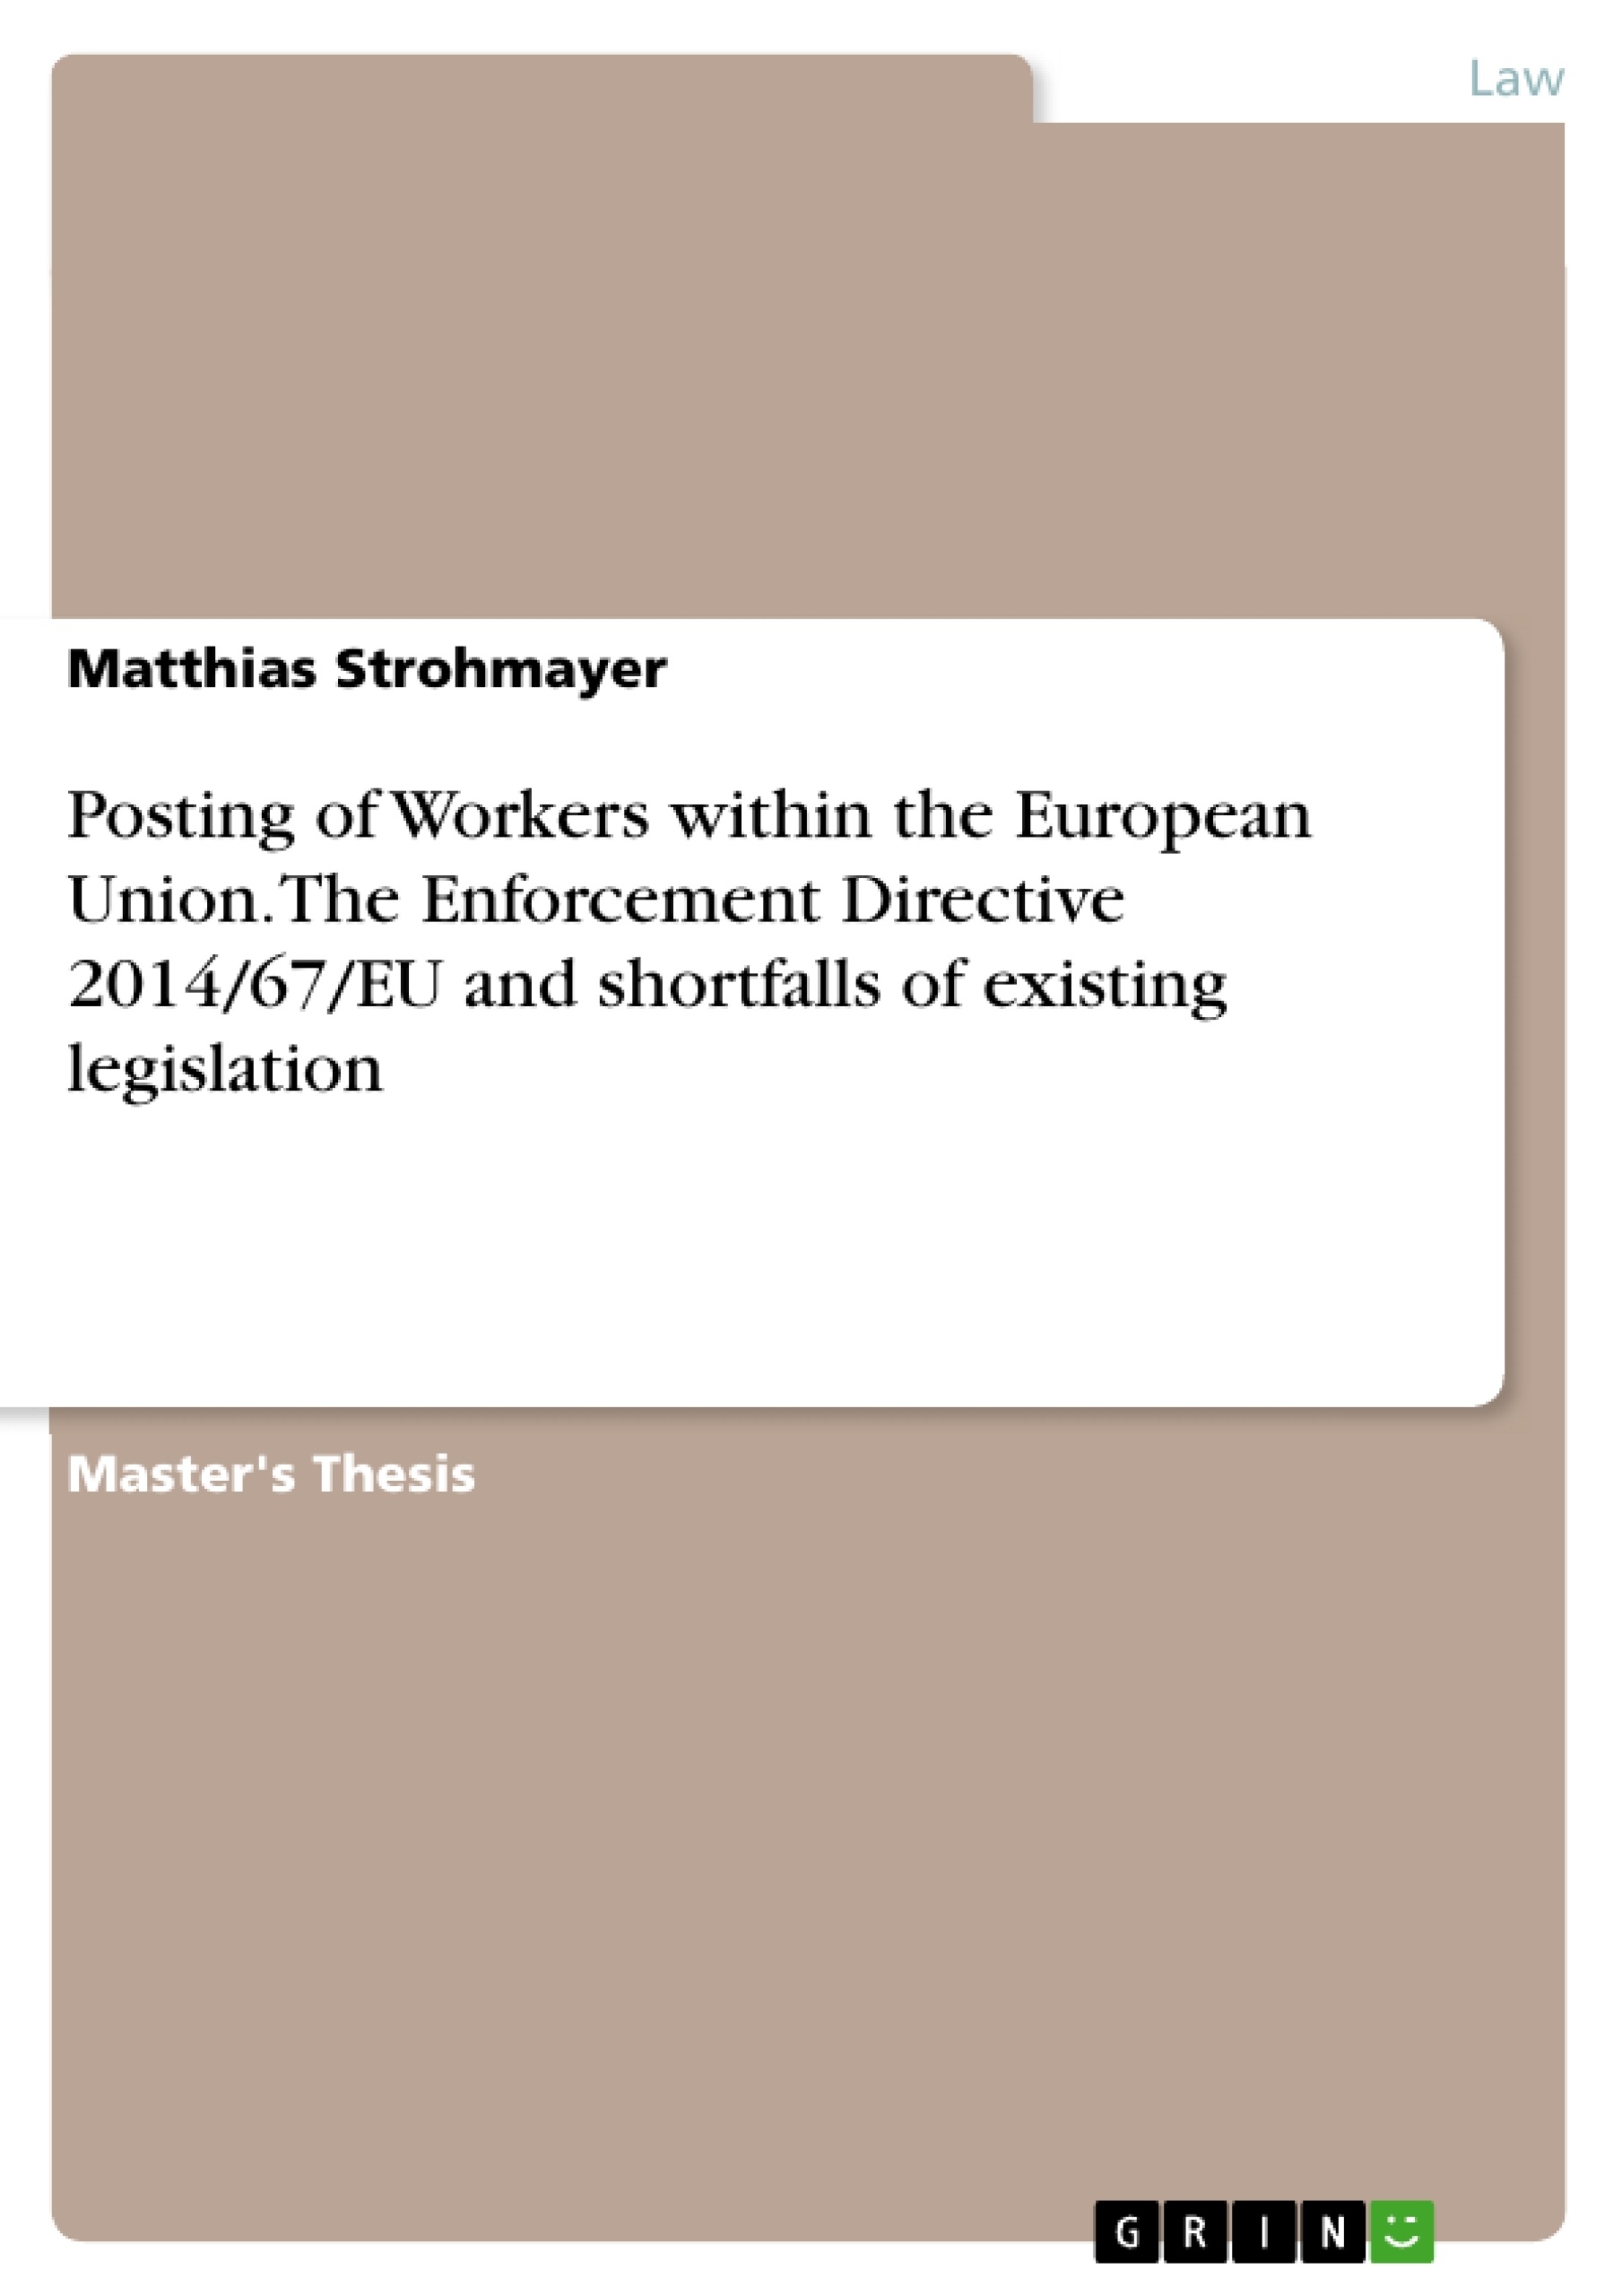 Título: Posting of Workers within the European Union. The Enforcement Directive 2014/67/EU and shortfalls of existing legislation